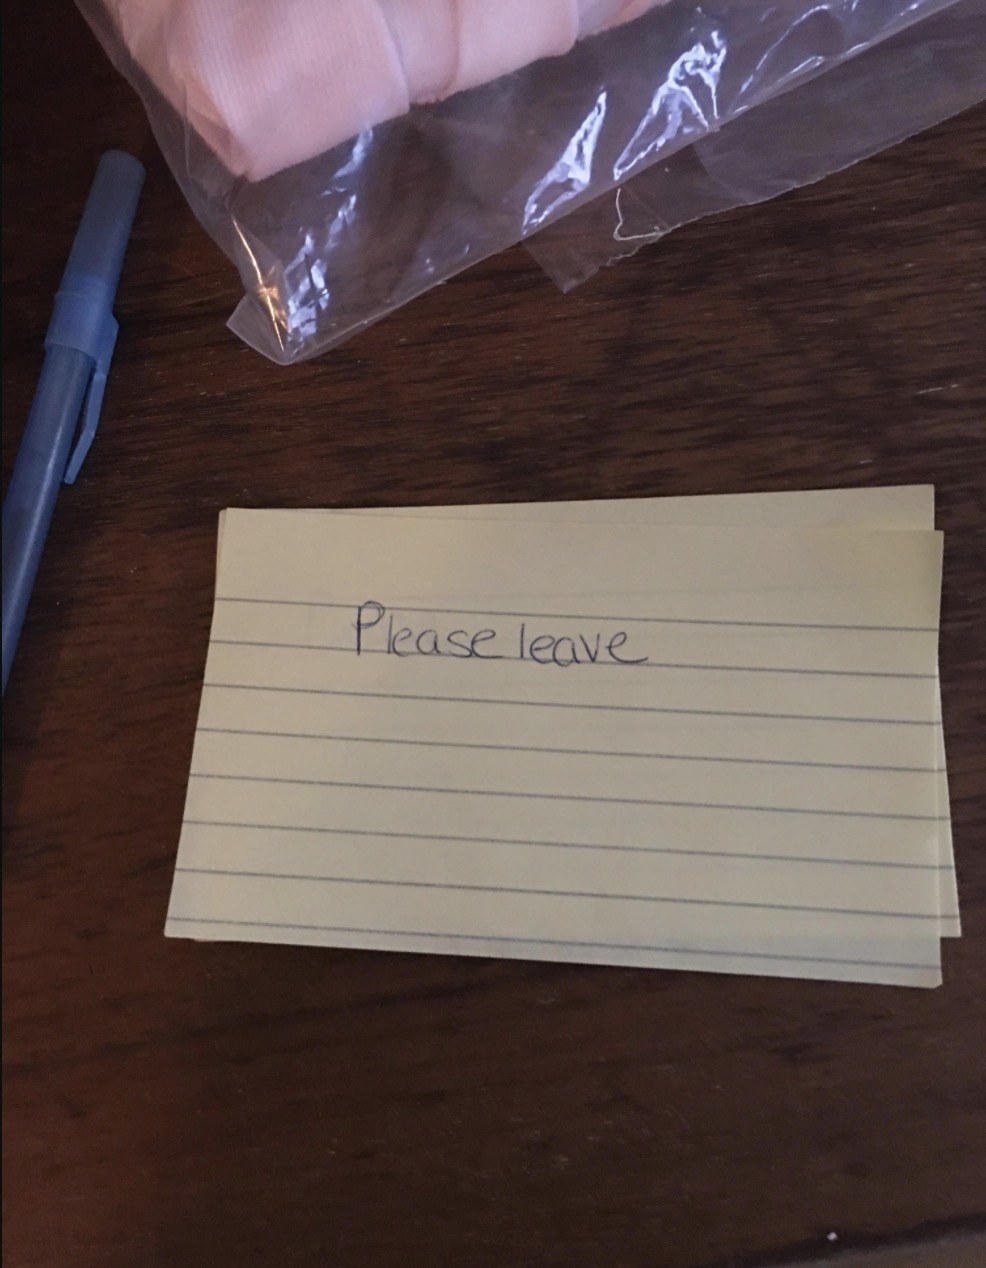 A note card with just &quot;Please leave&quot; on it